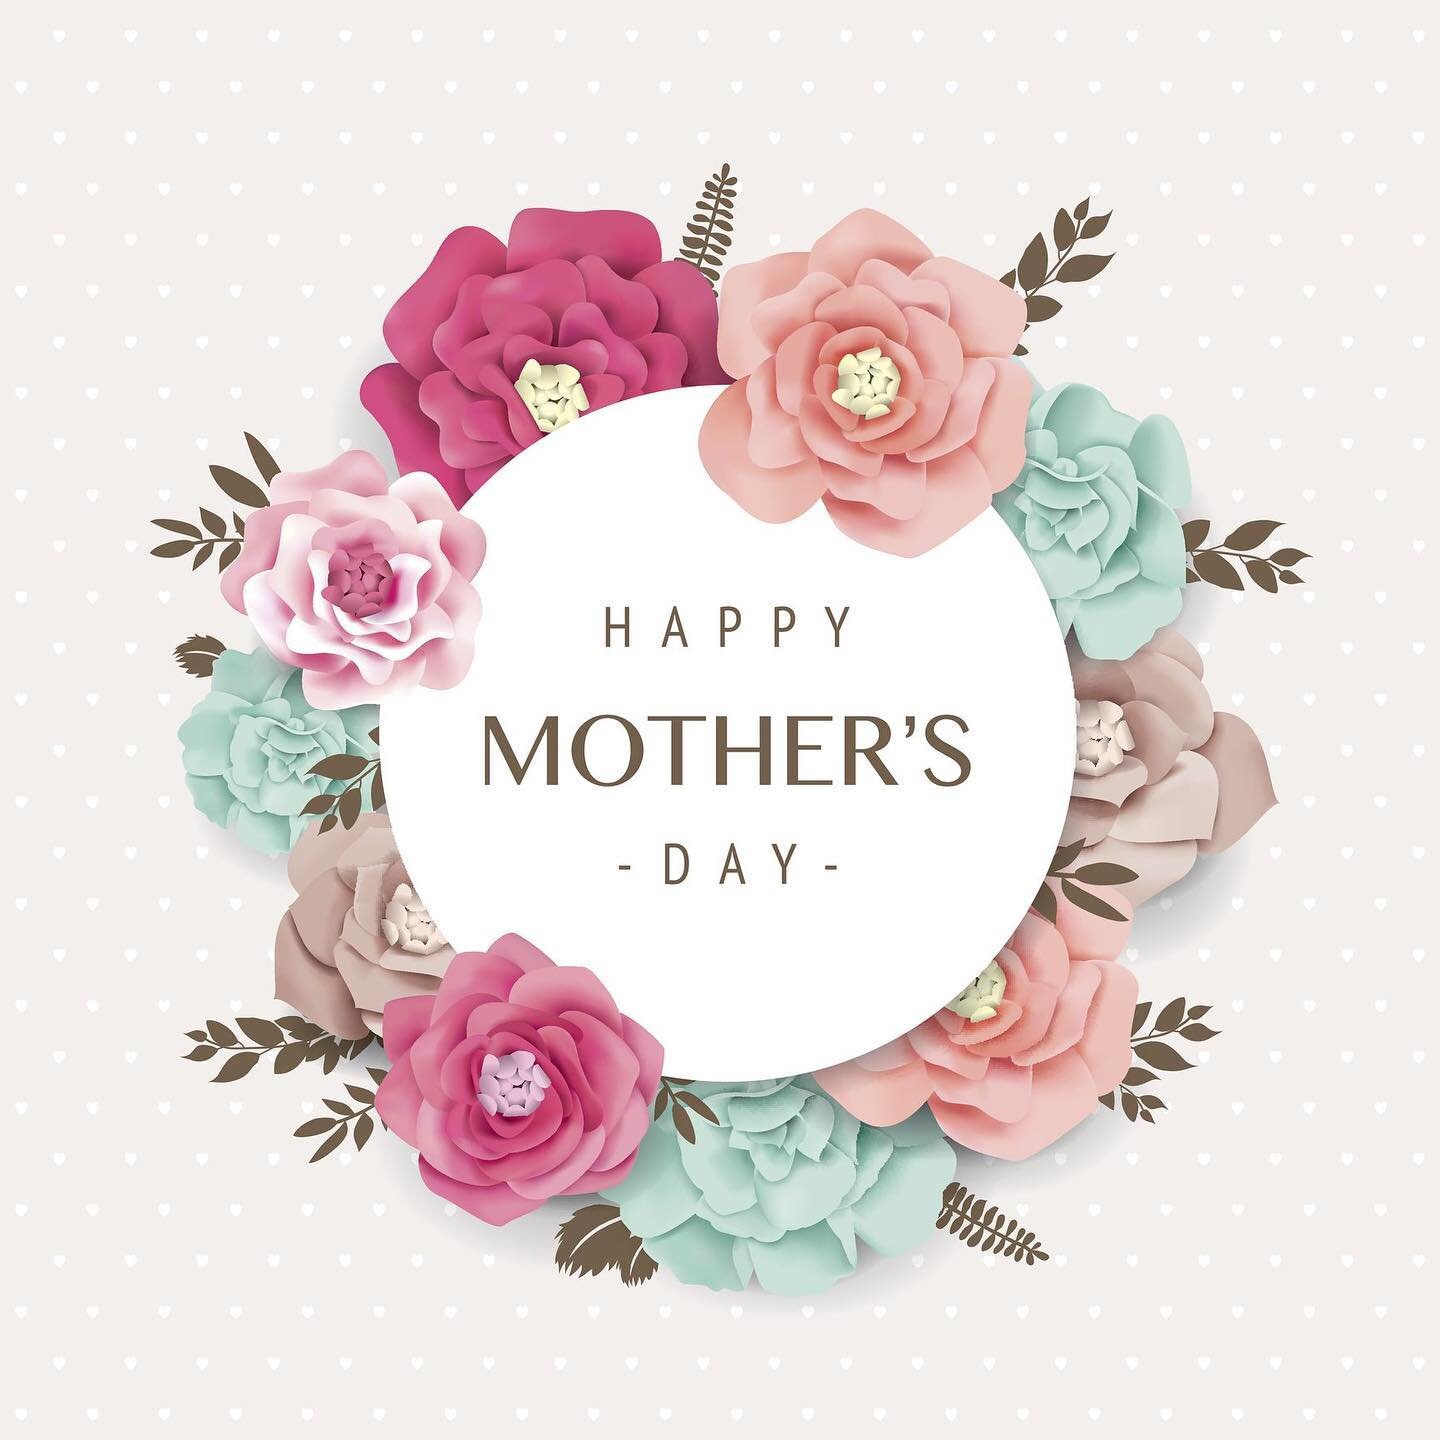 We would like to wish all mothers a happy mother&rsquo;s day!